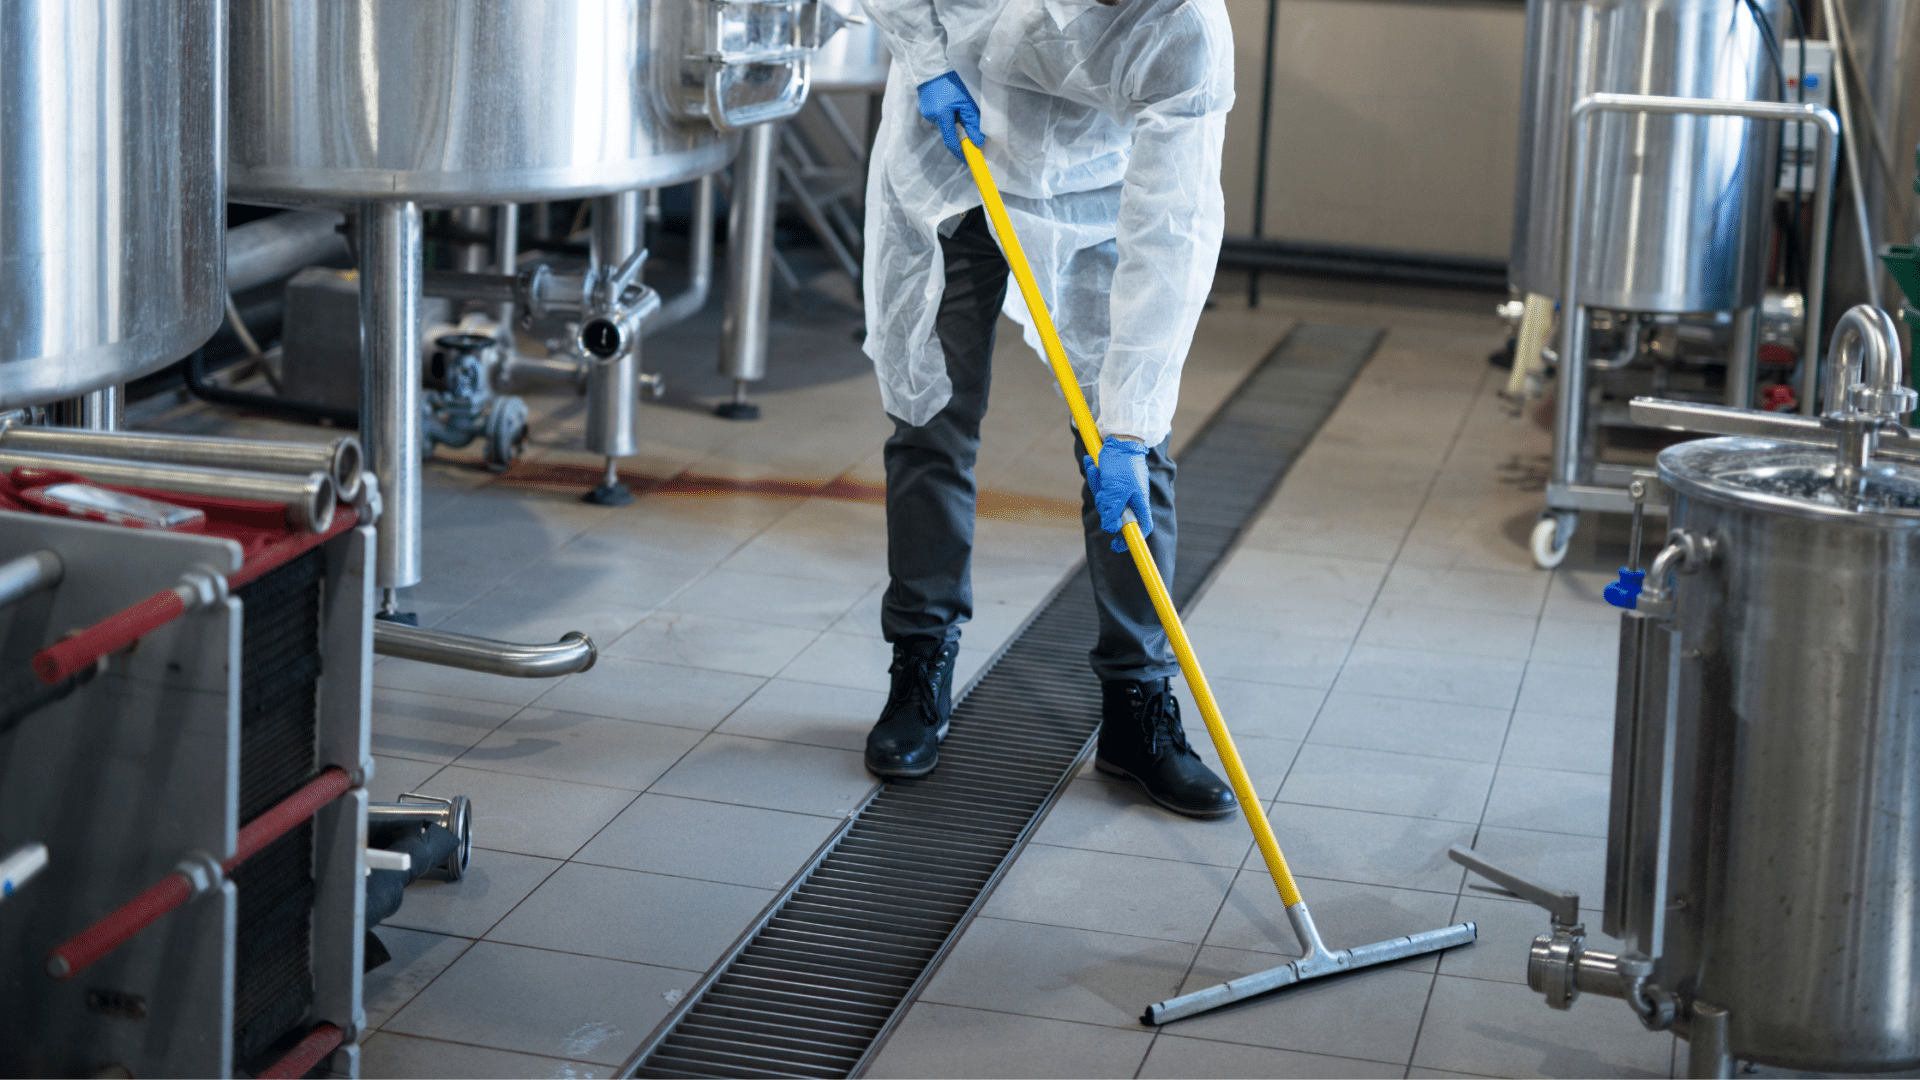 Front image of a person with a squeegee, sanitising a tiled floor with food processing equipment.